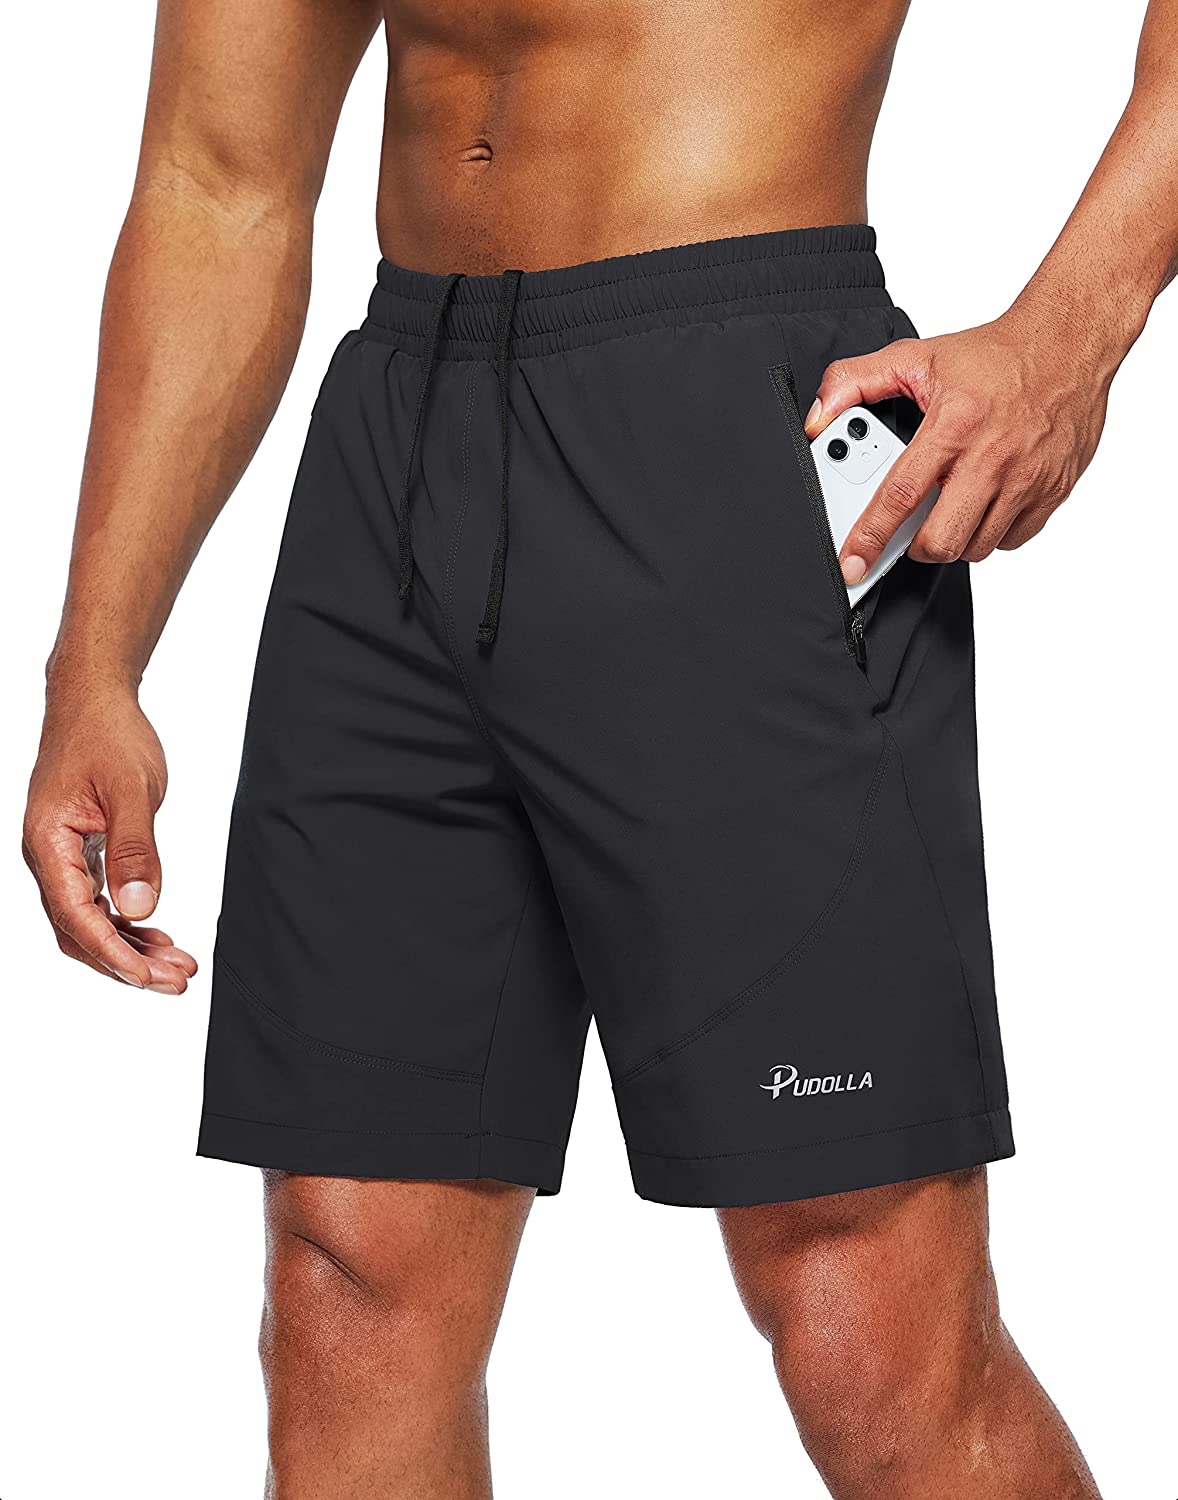 Pudolla Men's Gym Workout Shorts Weightlifting Squatting Shorts for Men Bodybuilding Training Jogger with Zipper Pockets 